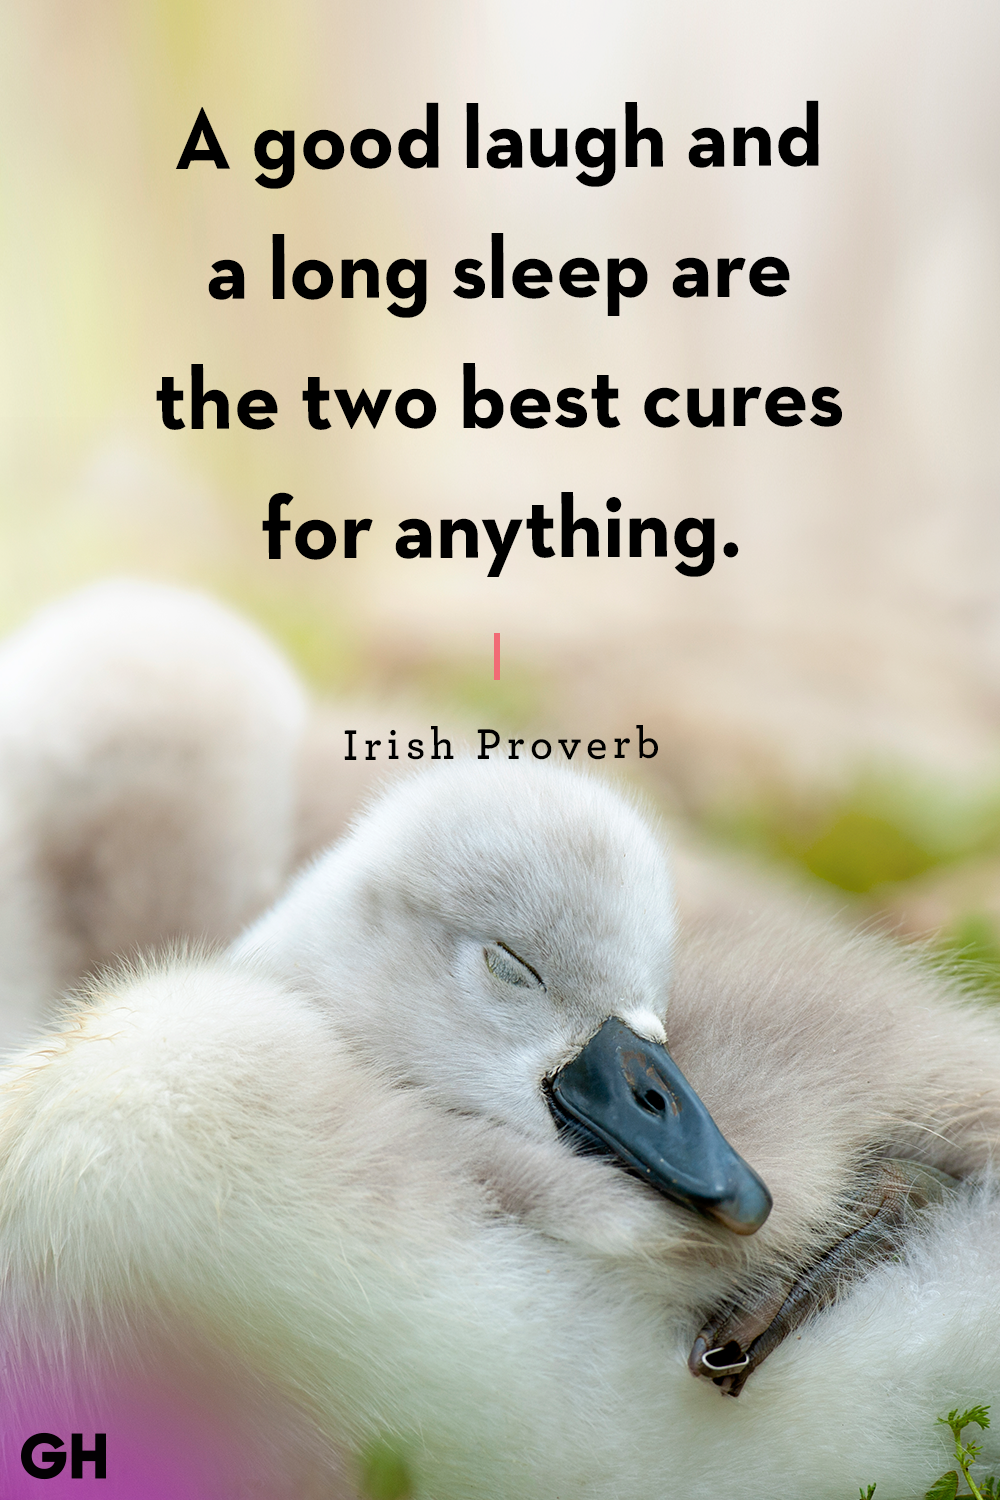 12 Quotes On People Who Just Love to Sleep